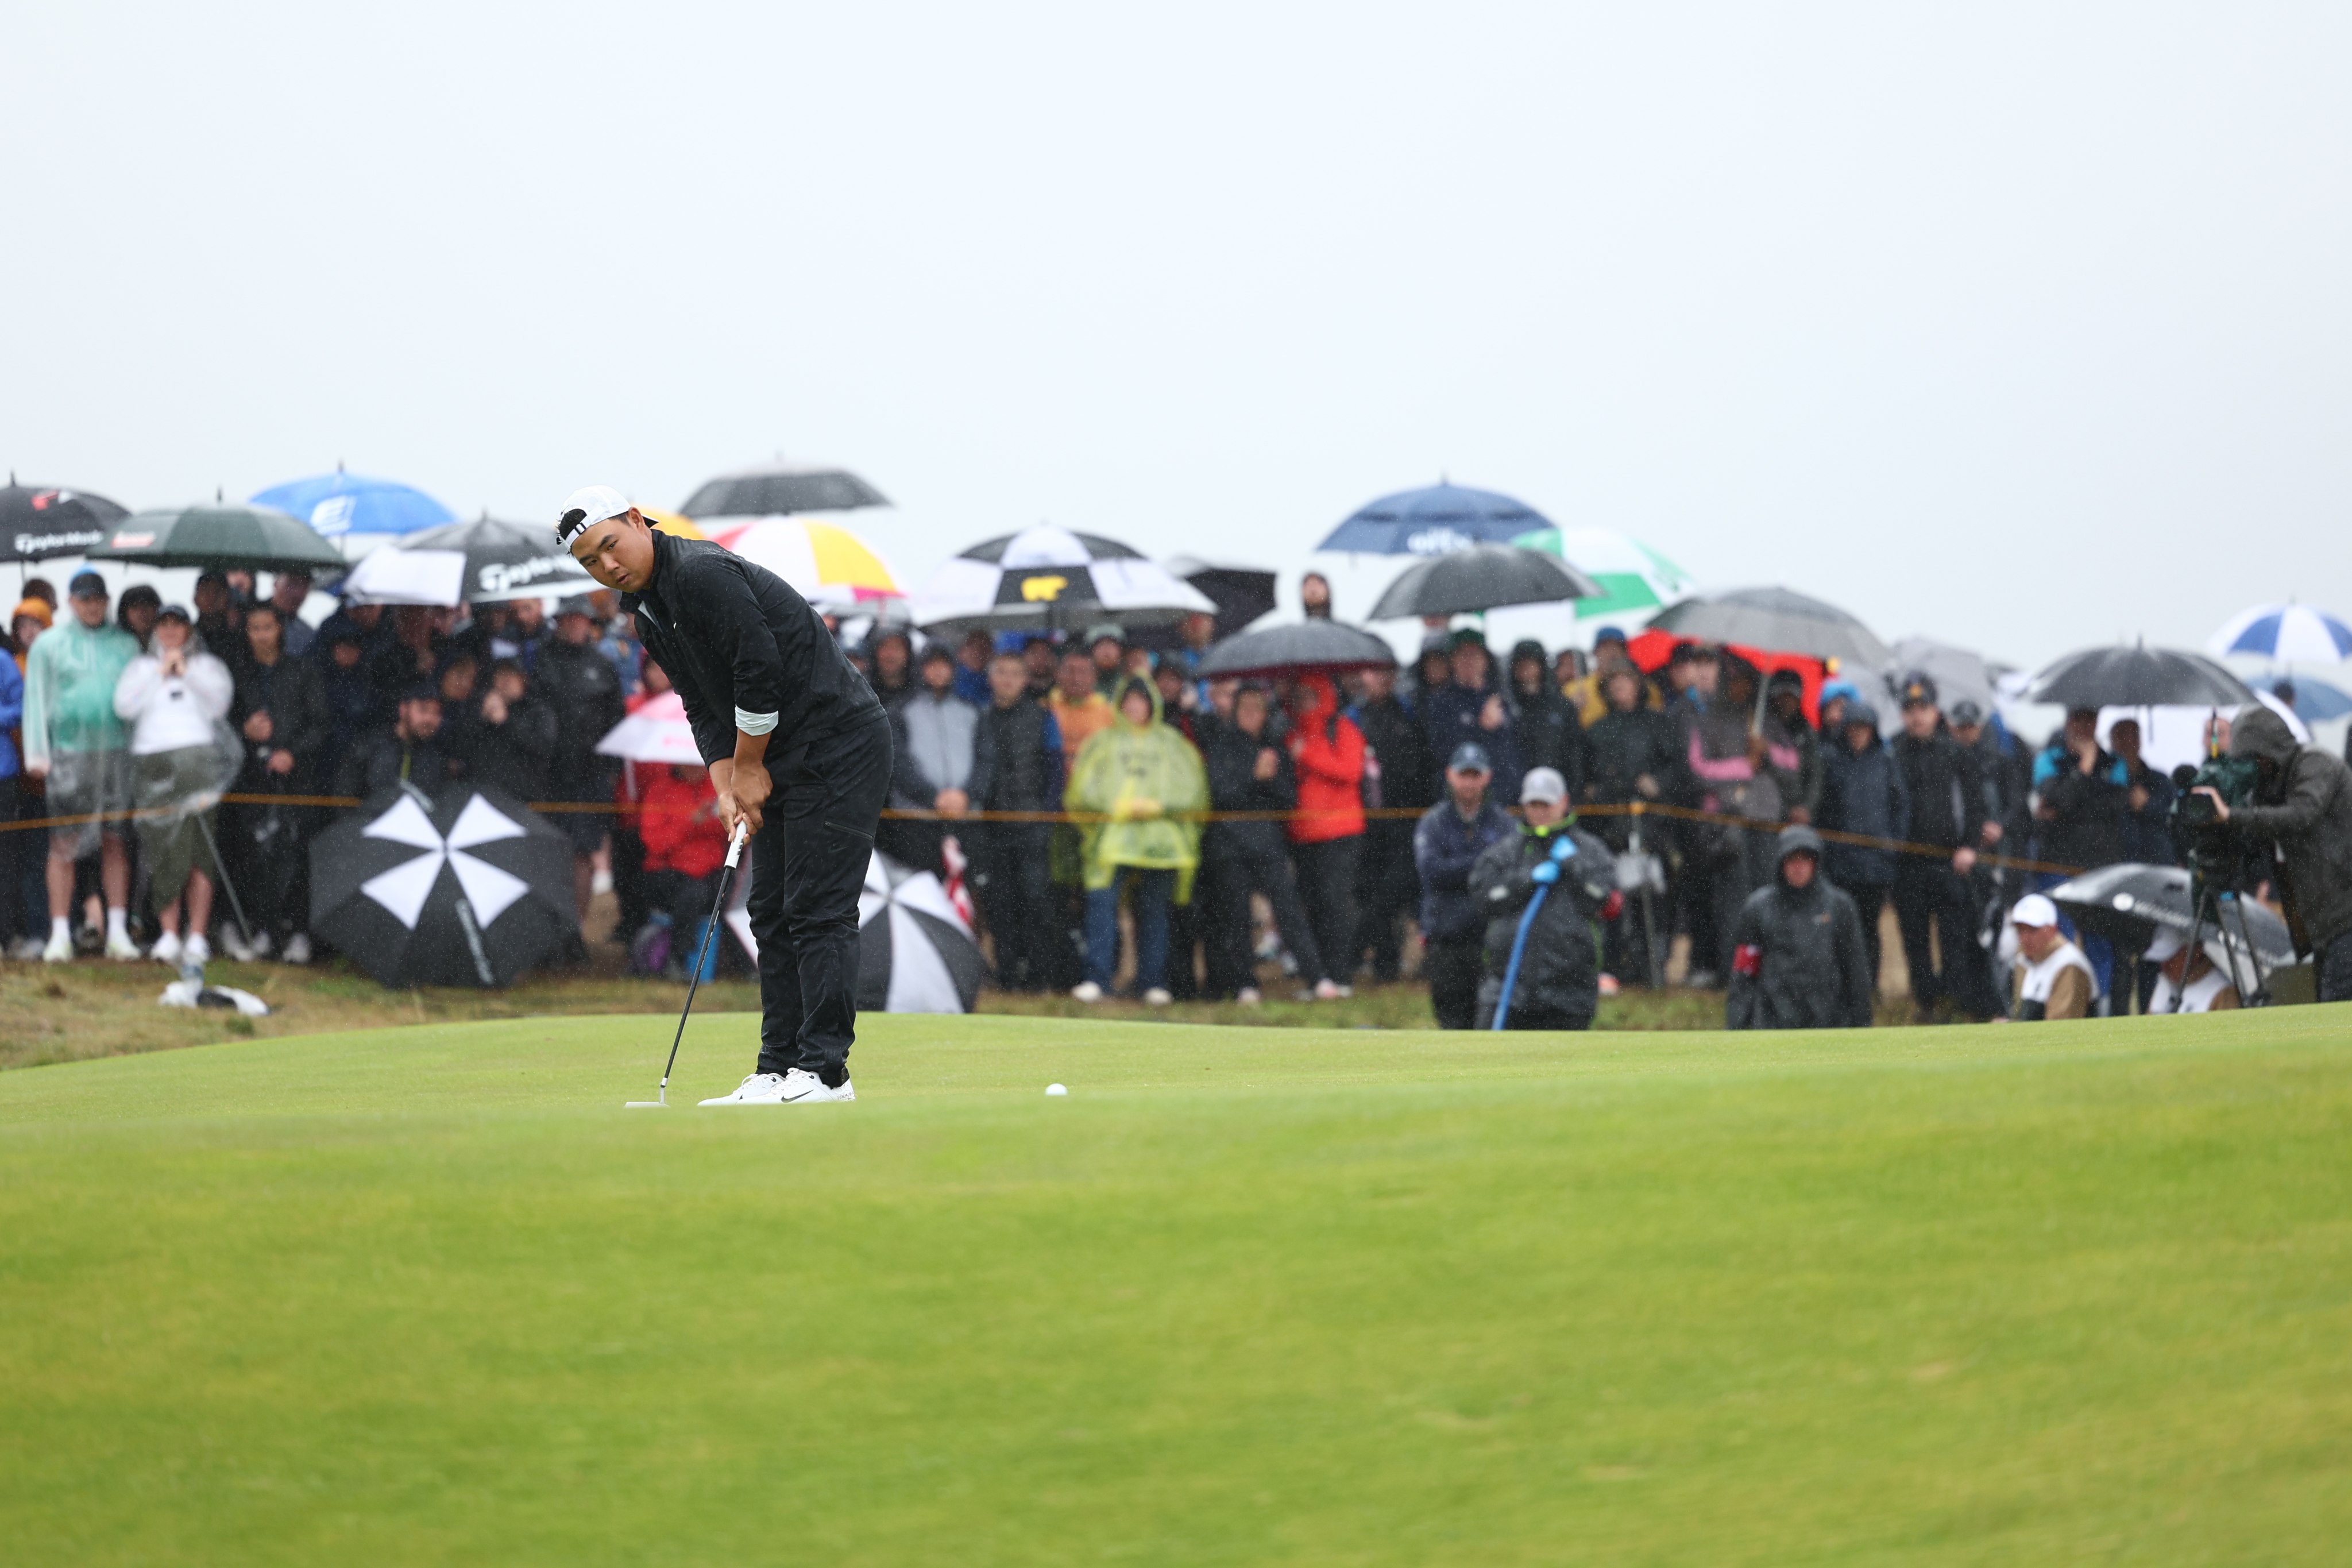 South Korea’s Tom Kim putts during his final round of The Open Championship. Photo: EPA-EFE